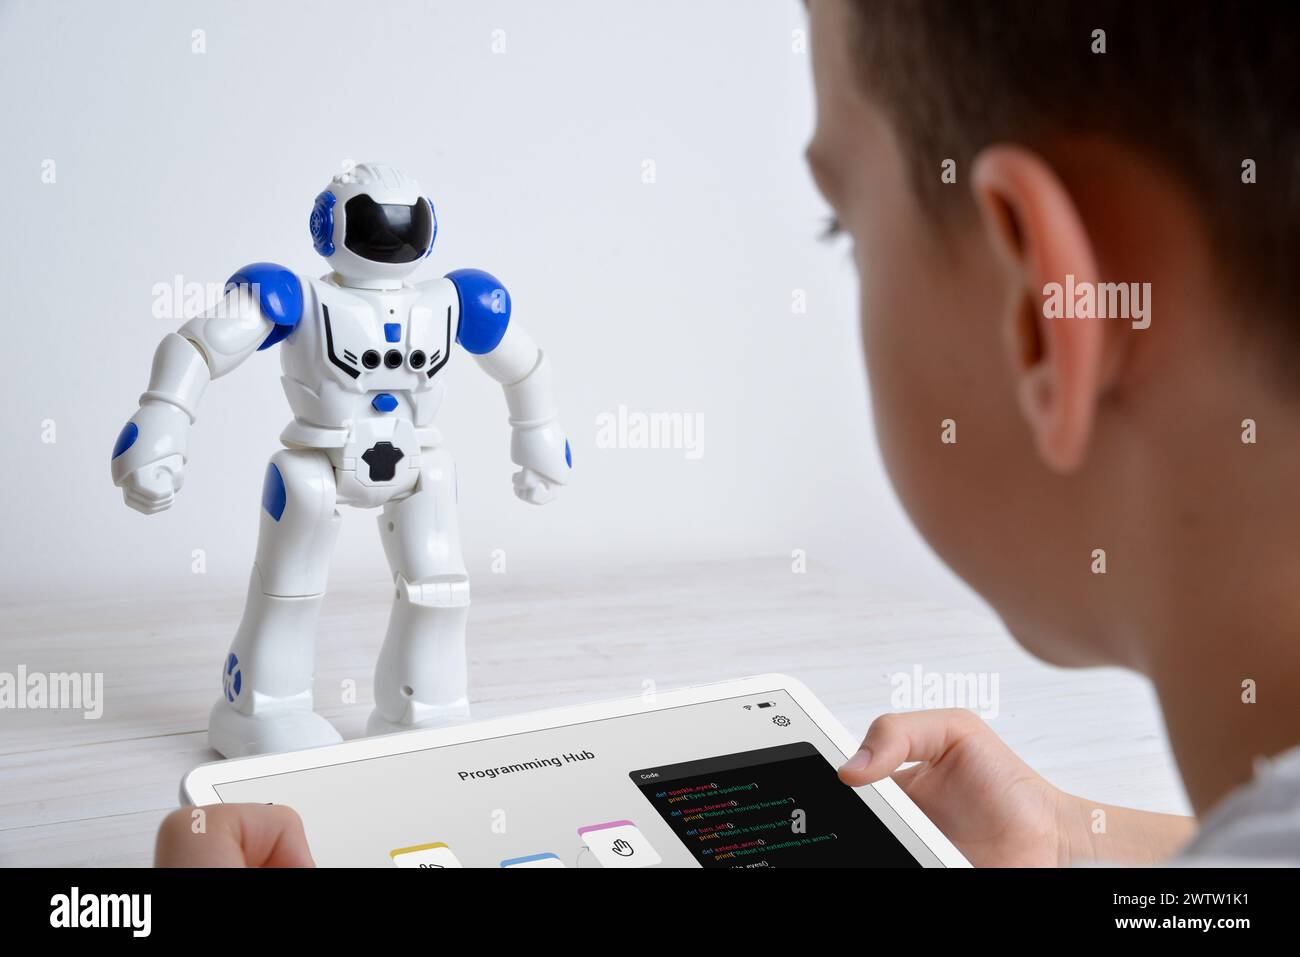 Boy controls robot using tablet on desk. Illustrating education, technology, innovation, and interactive learning experiences in robotics and programm Stock Photo